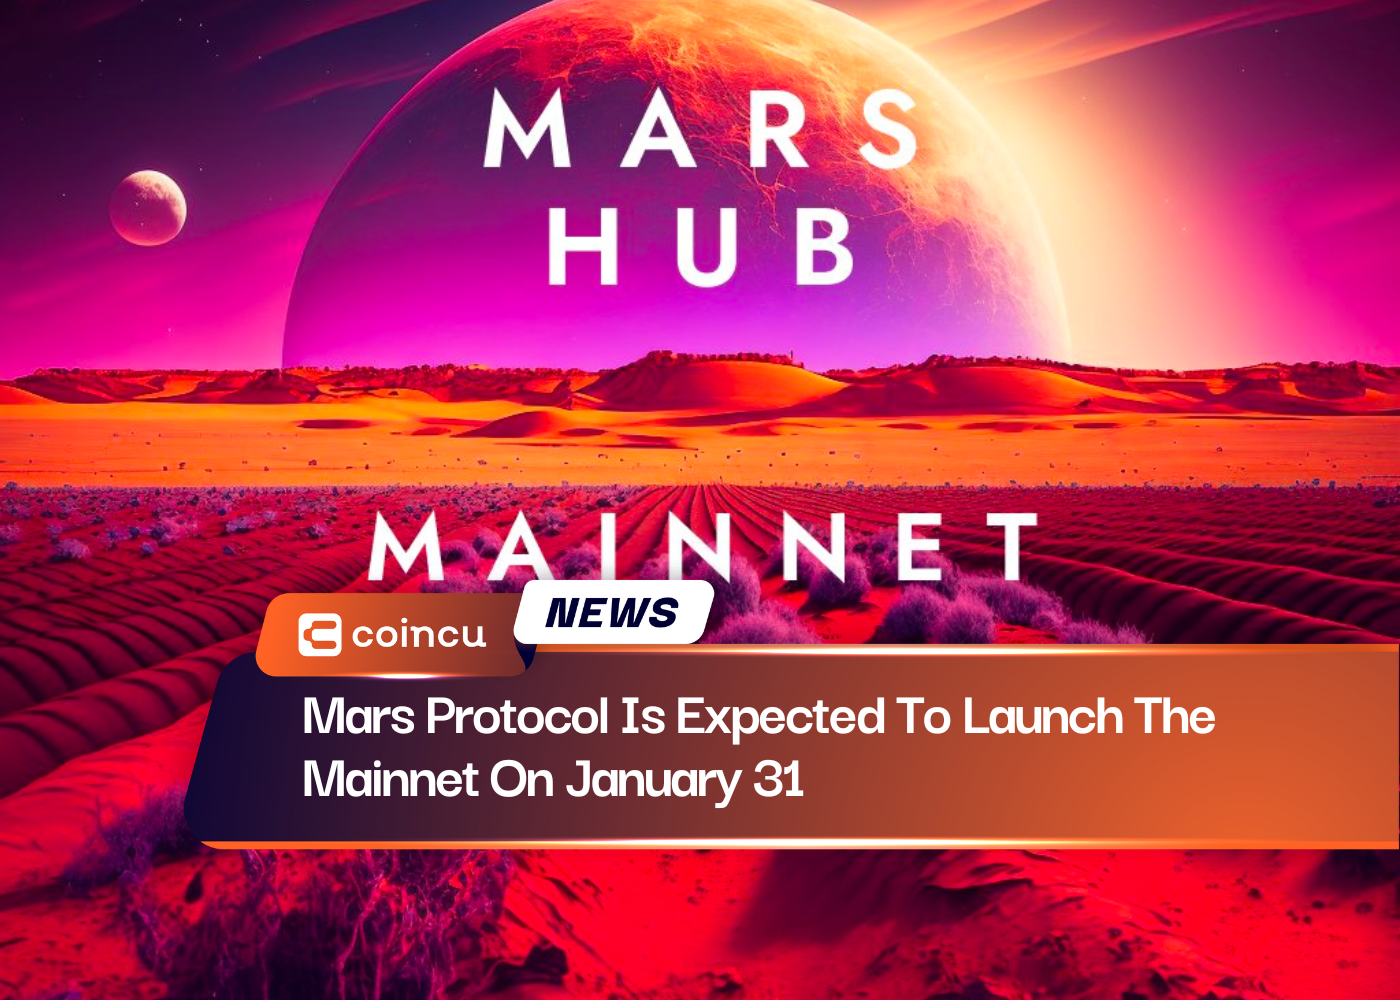 Mars Protocol Is Expected To Launch The Mainnet On January 31